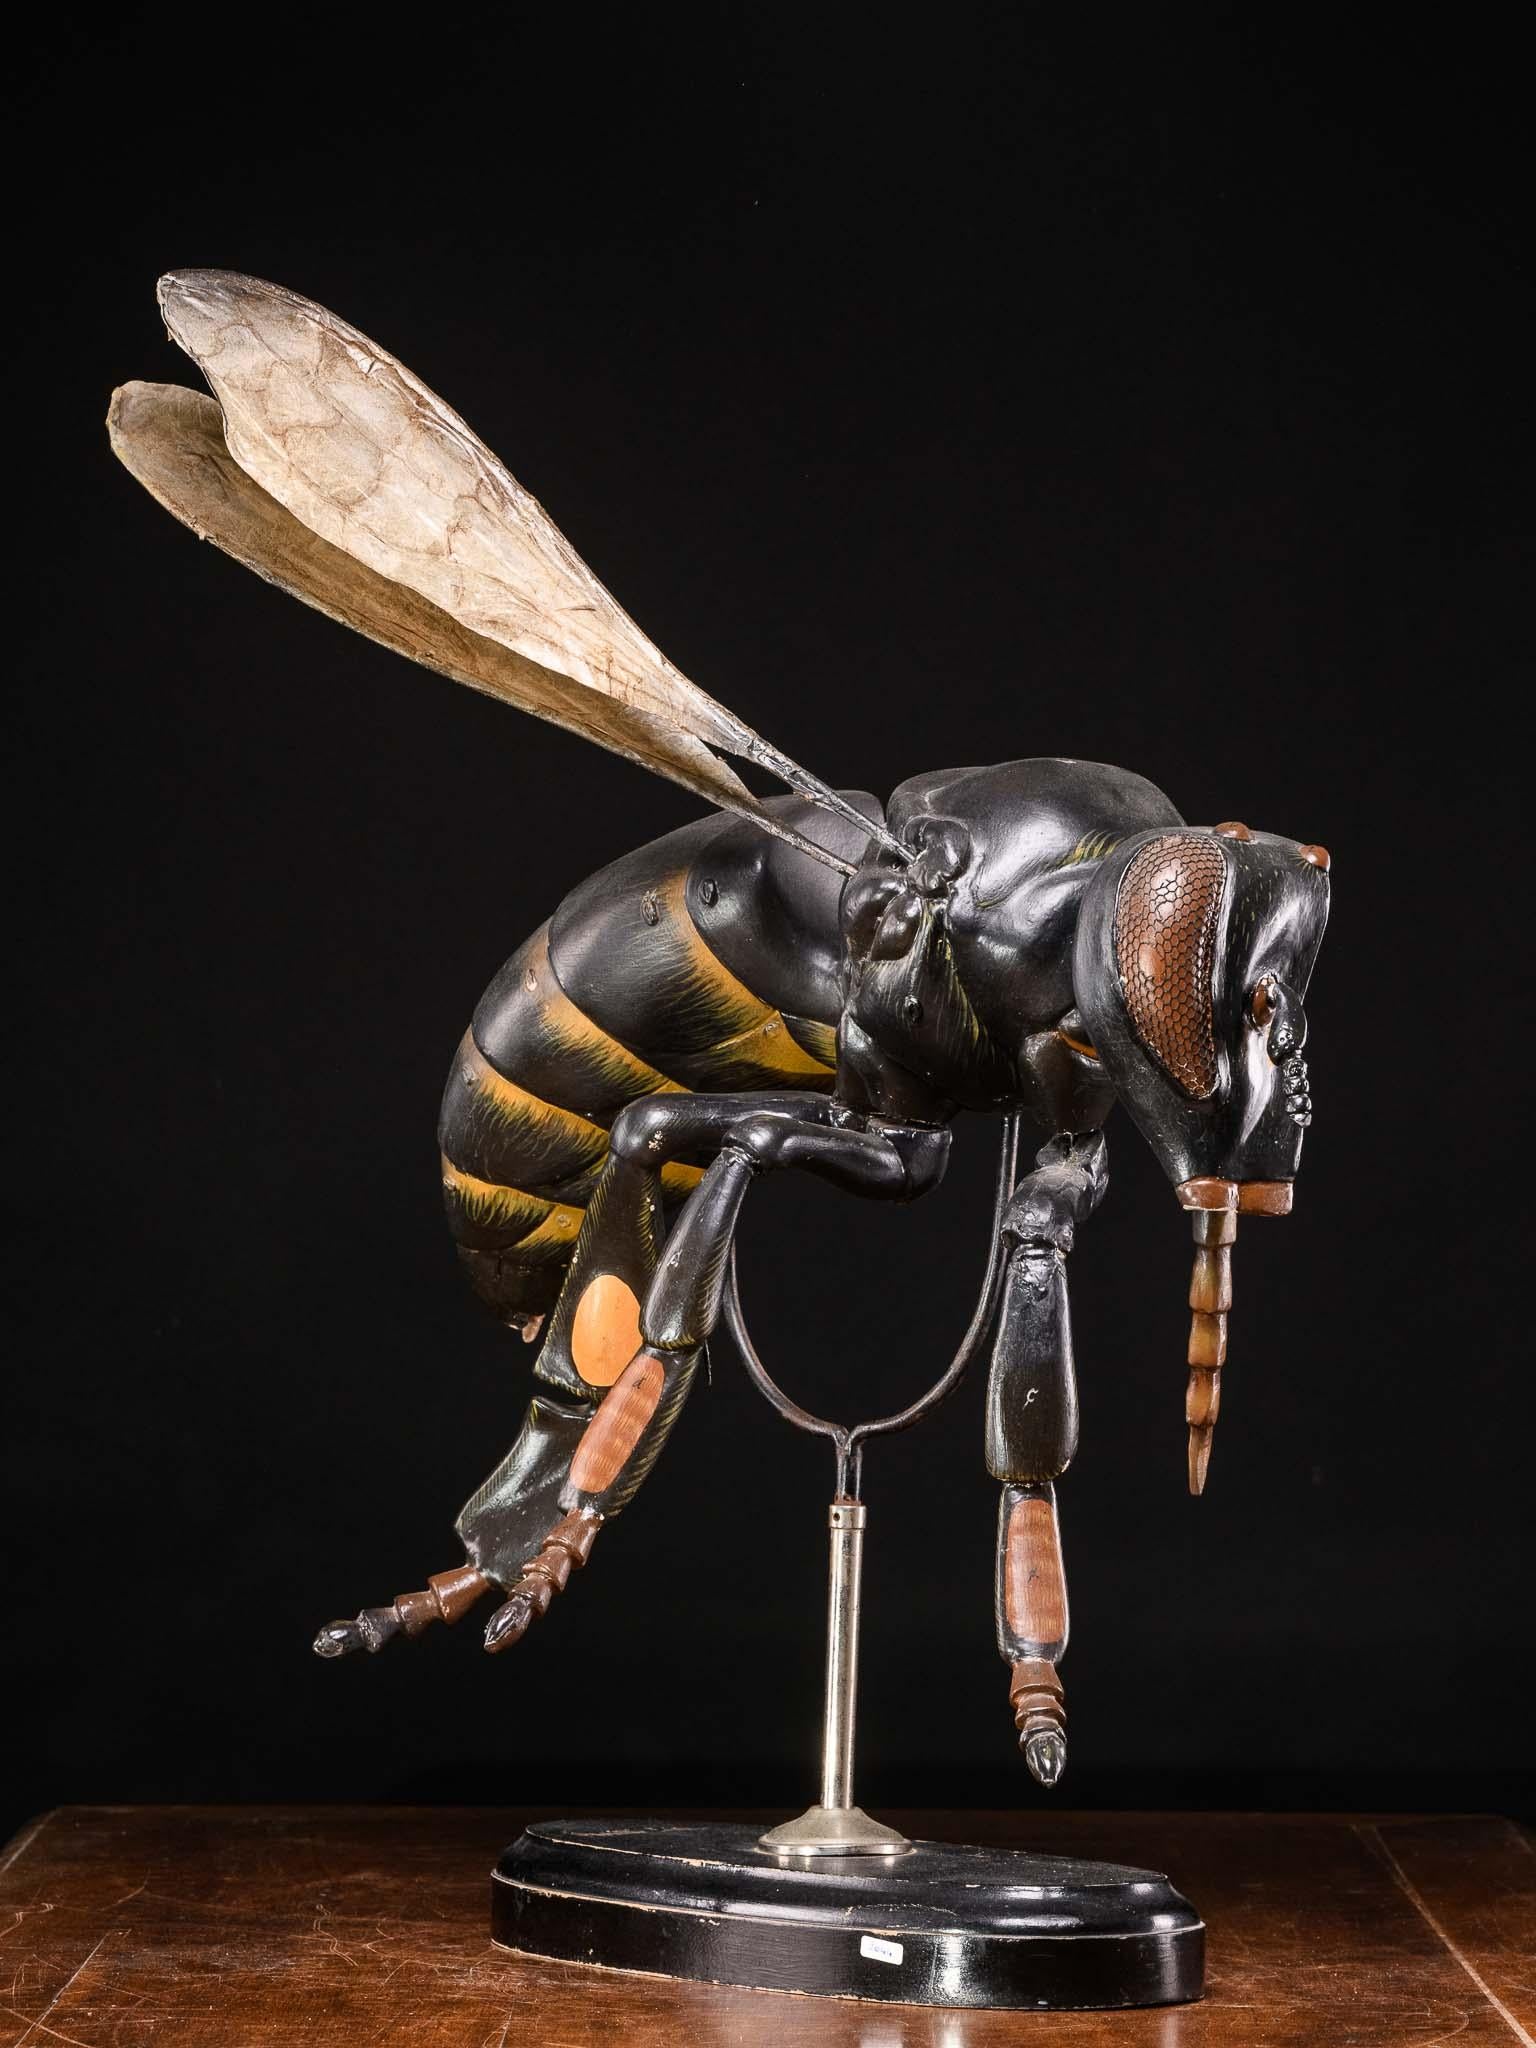 German Large Didactical Model of a Bee labeled “ Denoyer-Geppert Company of Chicago 